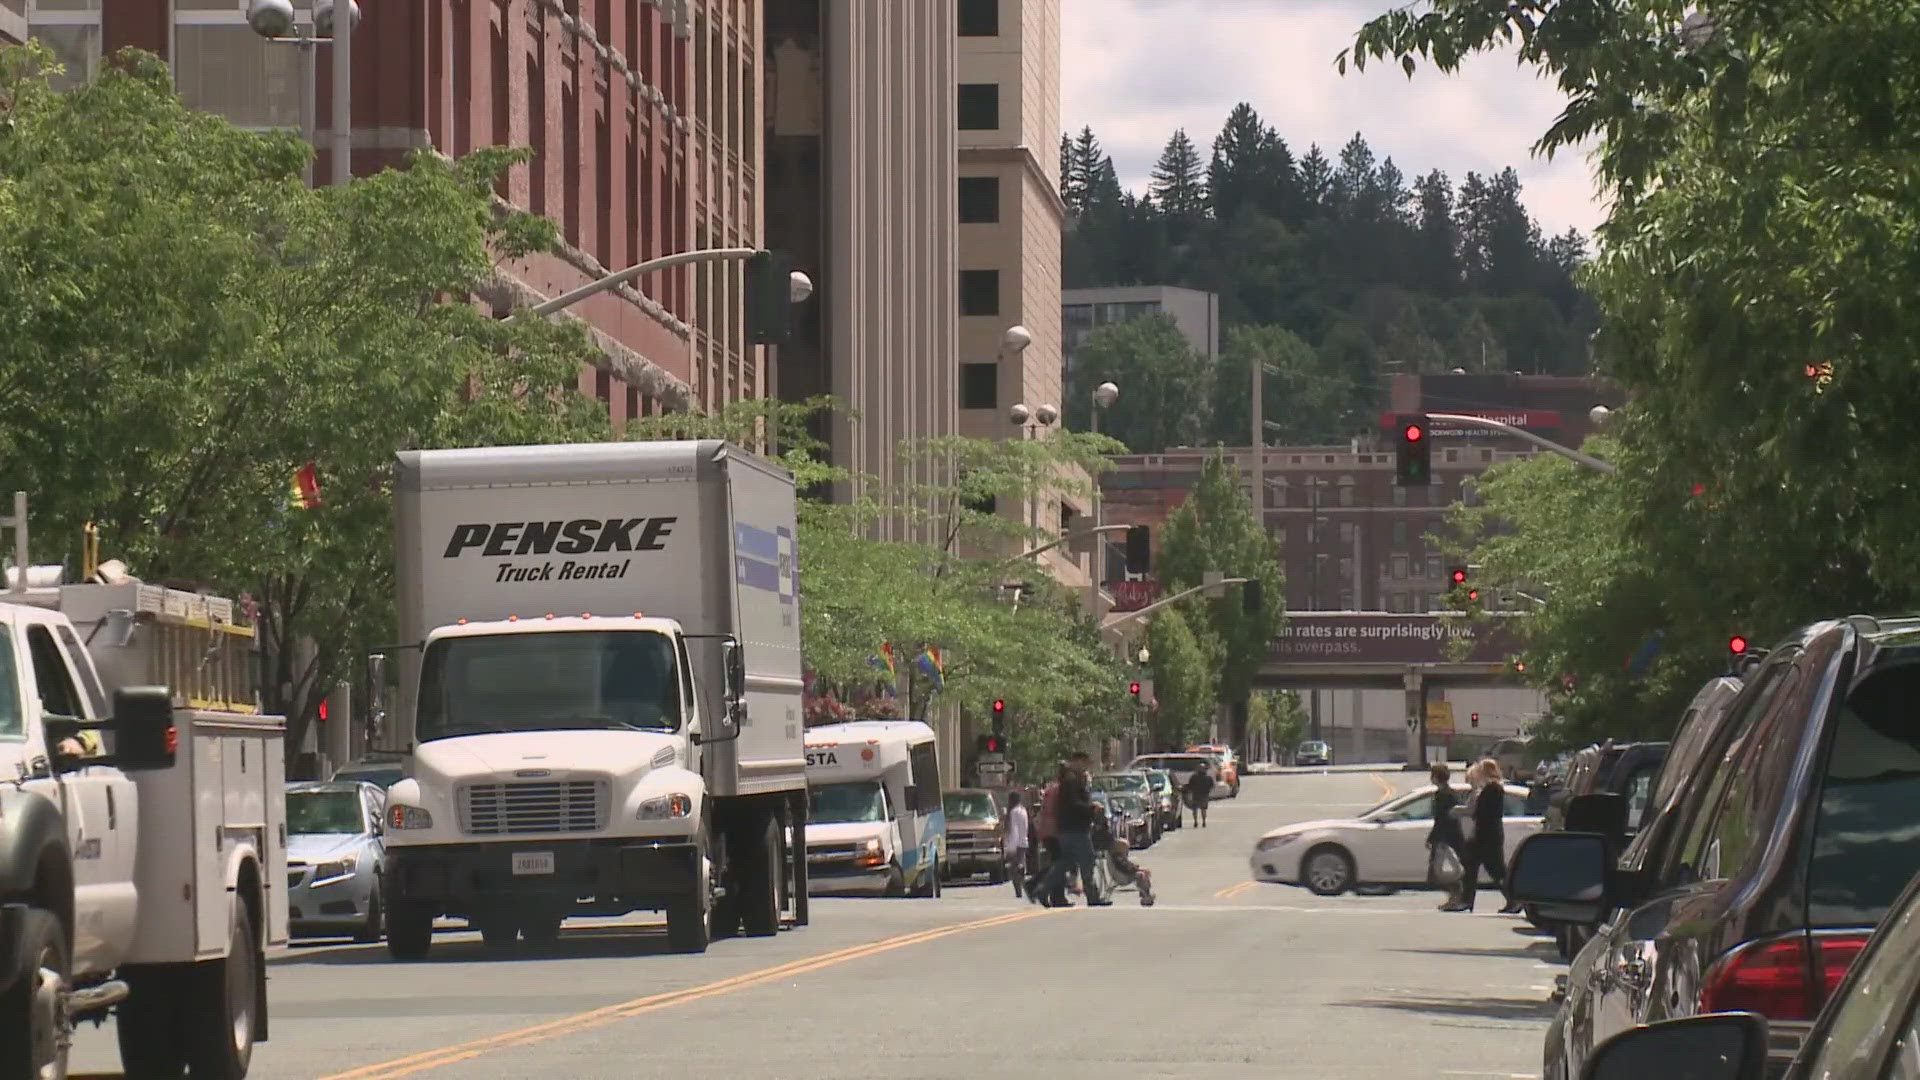 The City of Spokane is introducing two measures that will help chip away at the $50 million deficit.